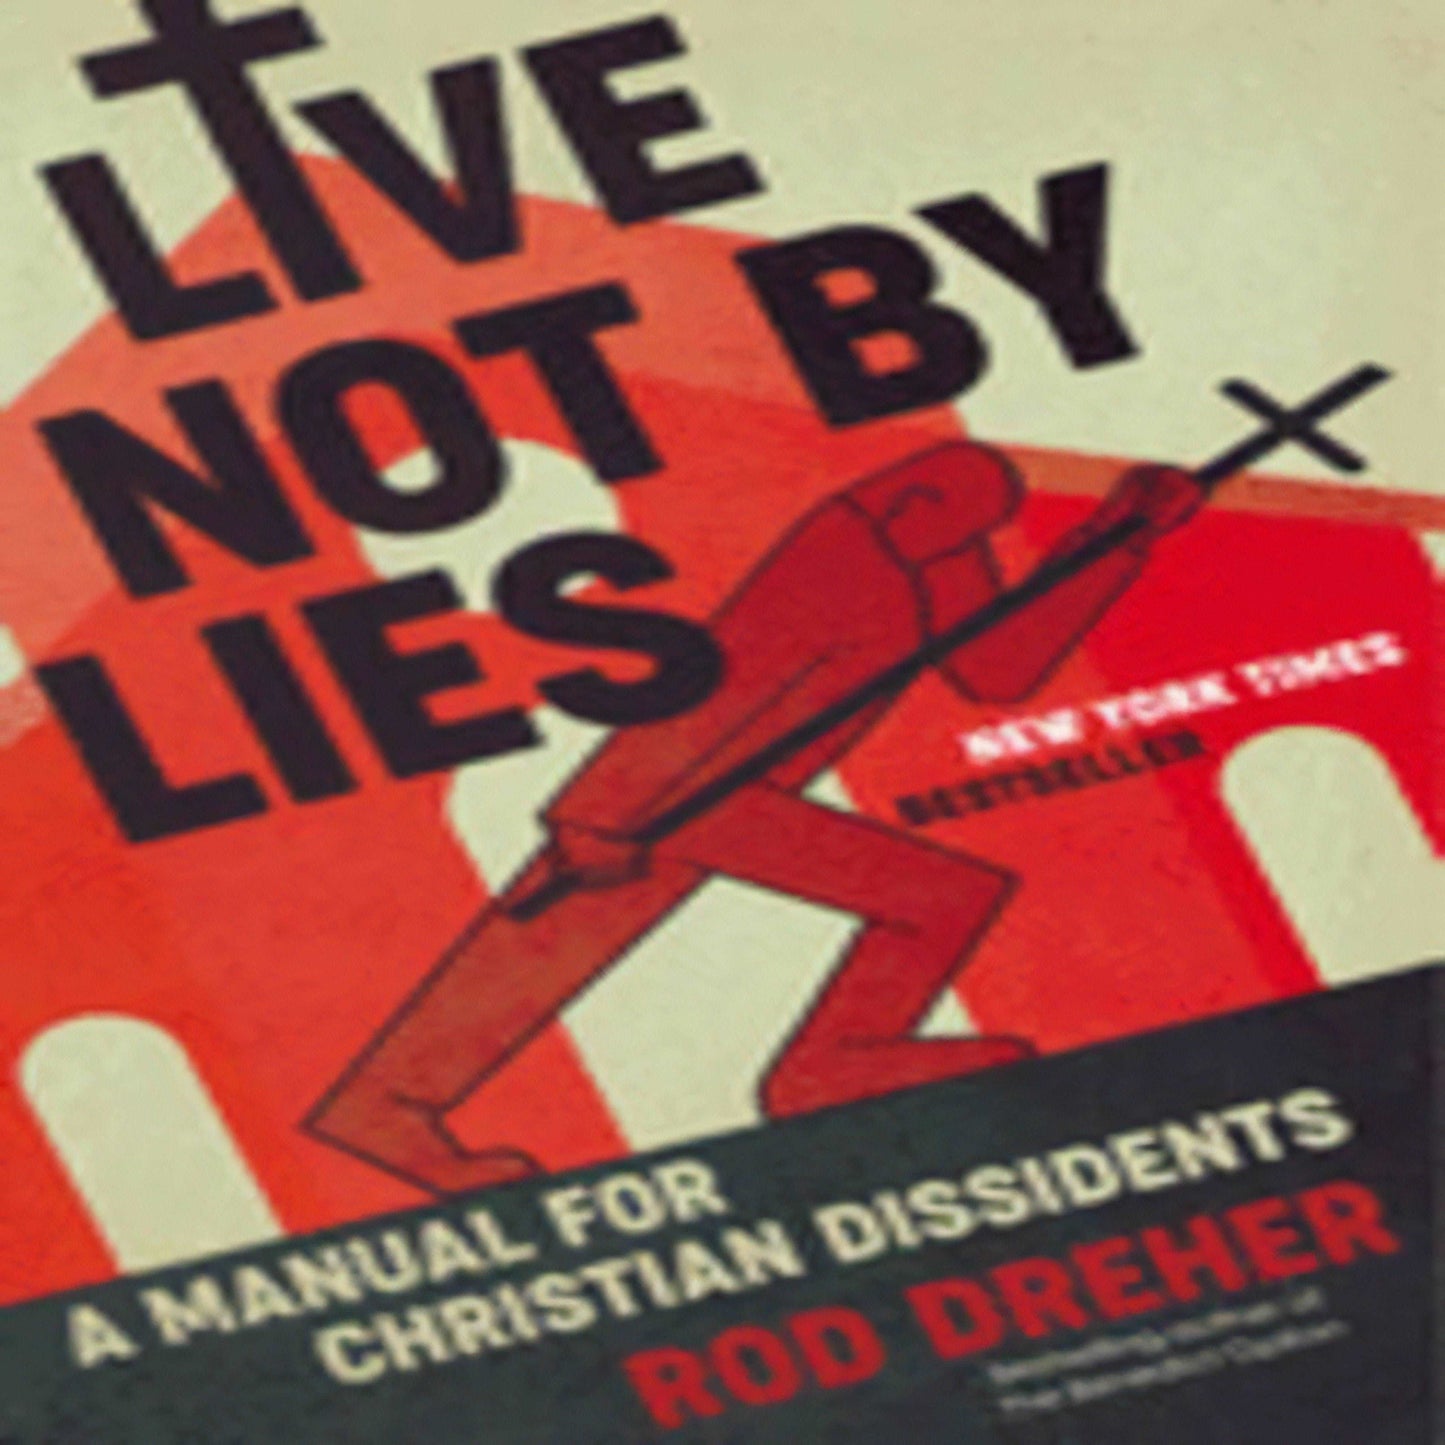 Live Not by Lies: A Manual for Christian Dissidents254-031823-0593087399DPGBOOKSTORE.COM. Today's Bestsellers.